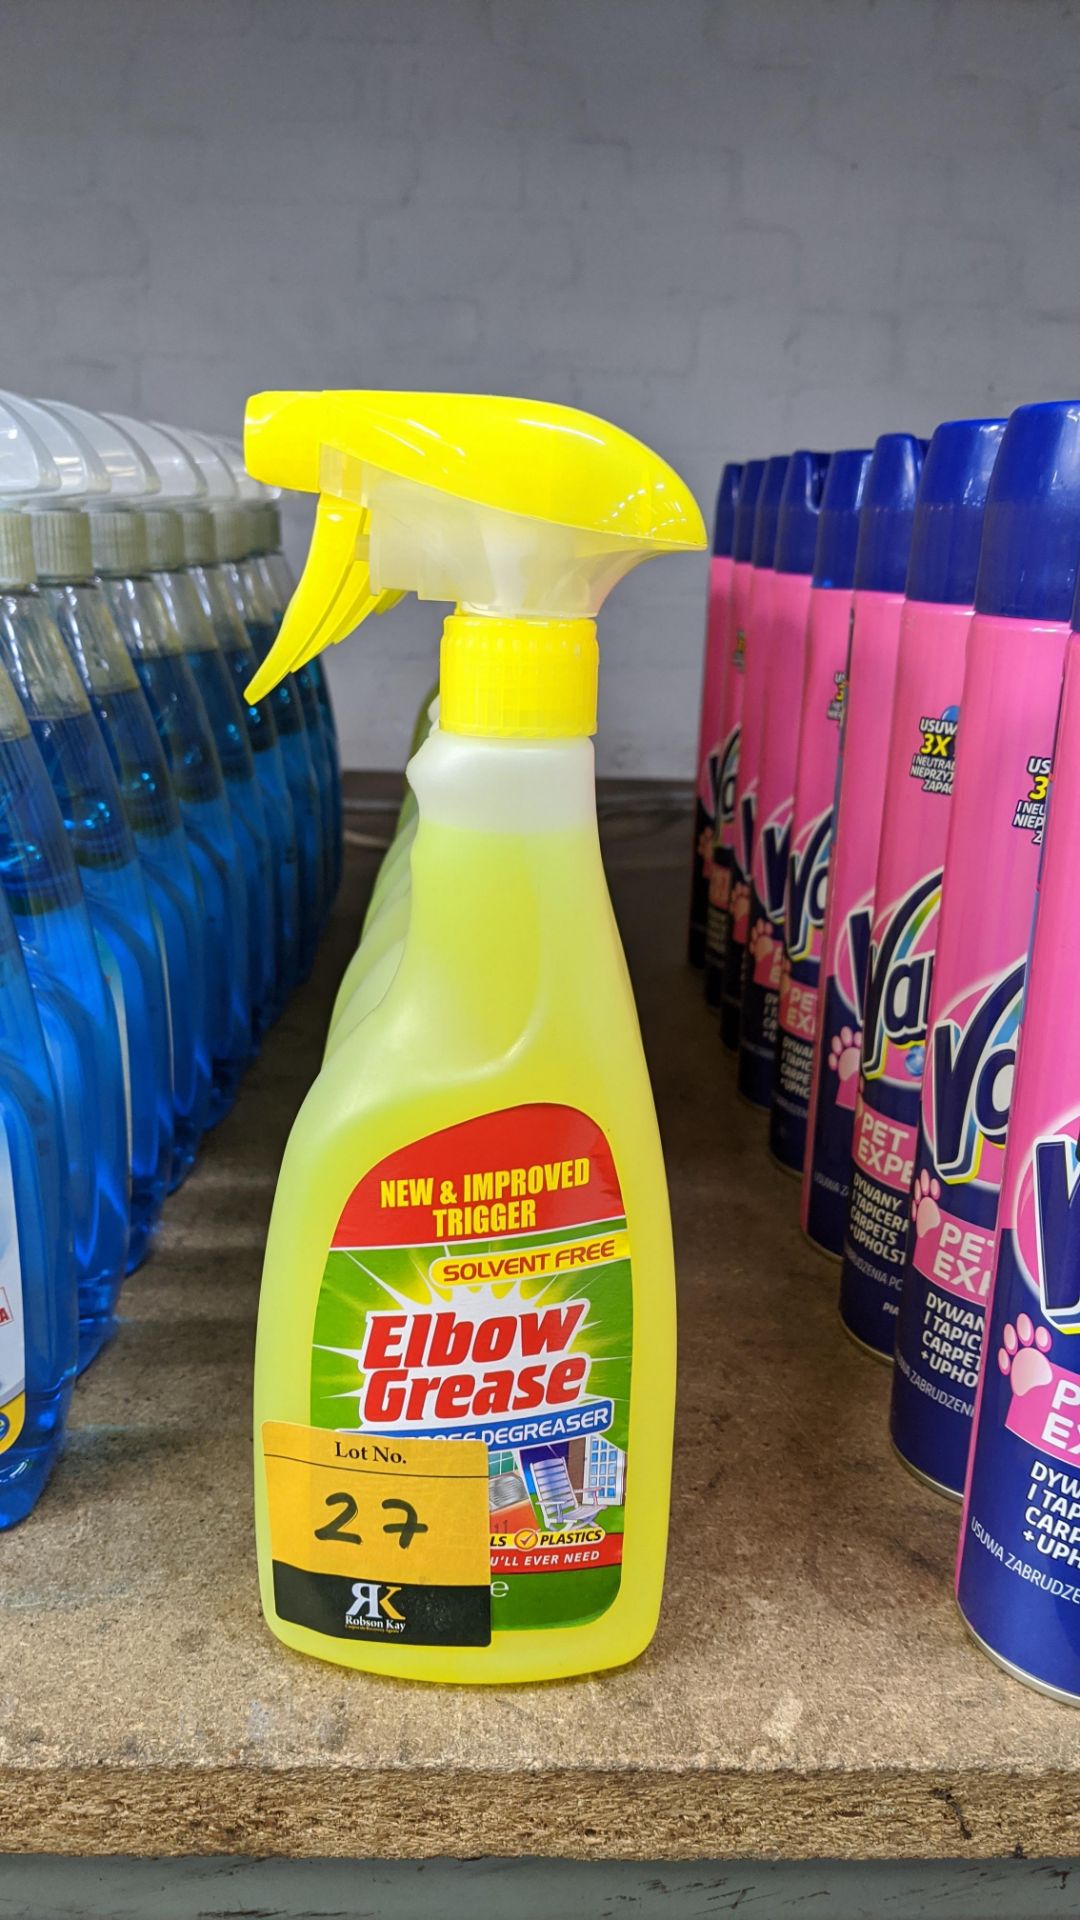 15 off 500ml bottles of Elbow Grease all purpose degreaser. IMPORTANT – DO NOT BID BEFORE READING